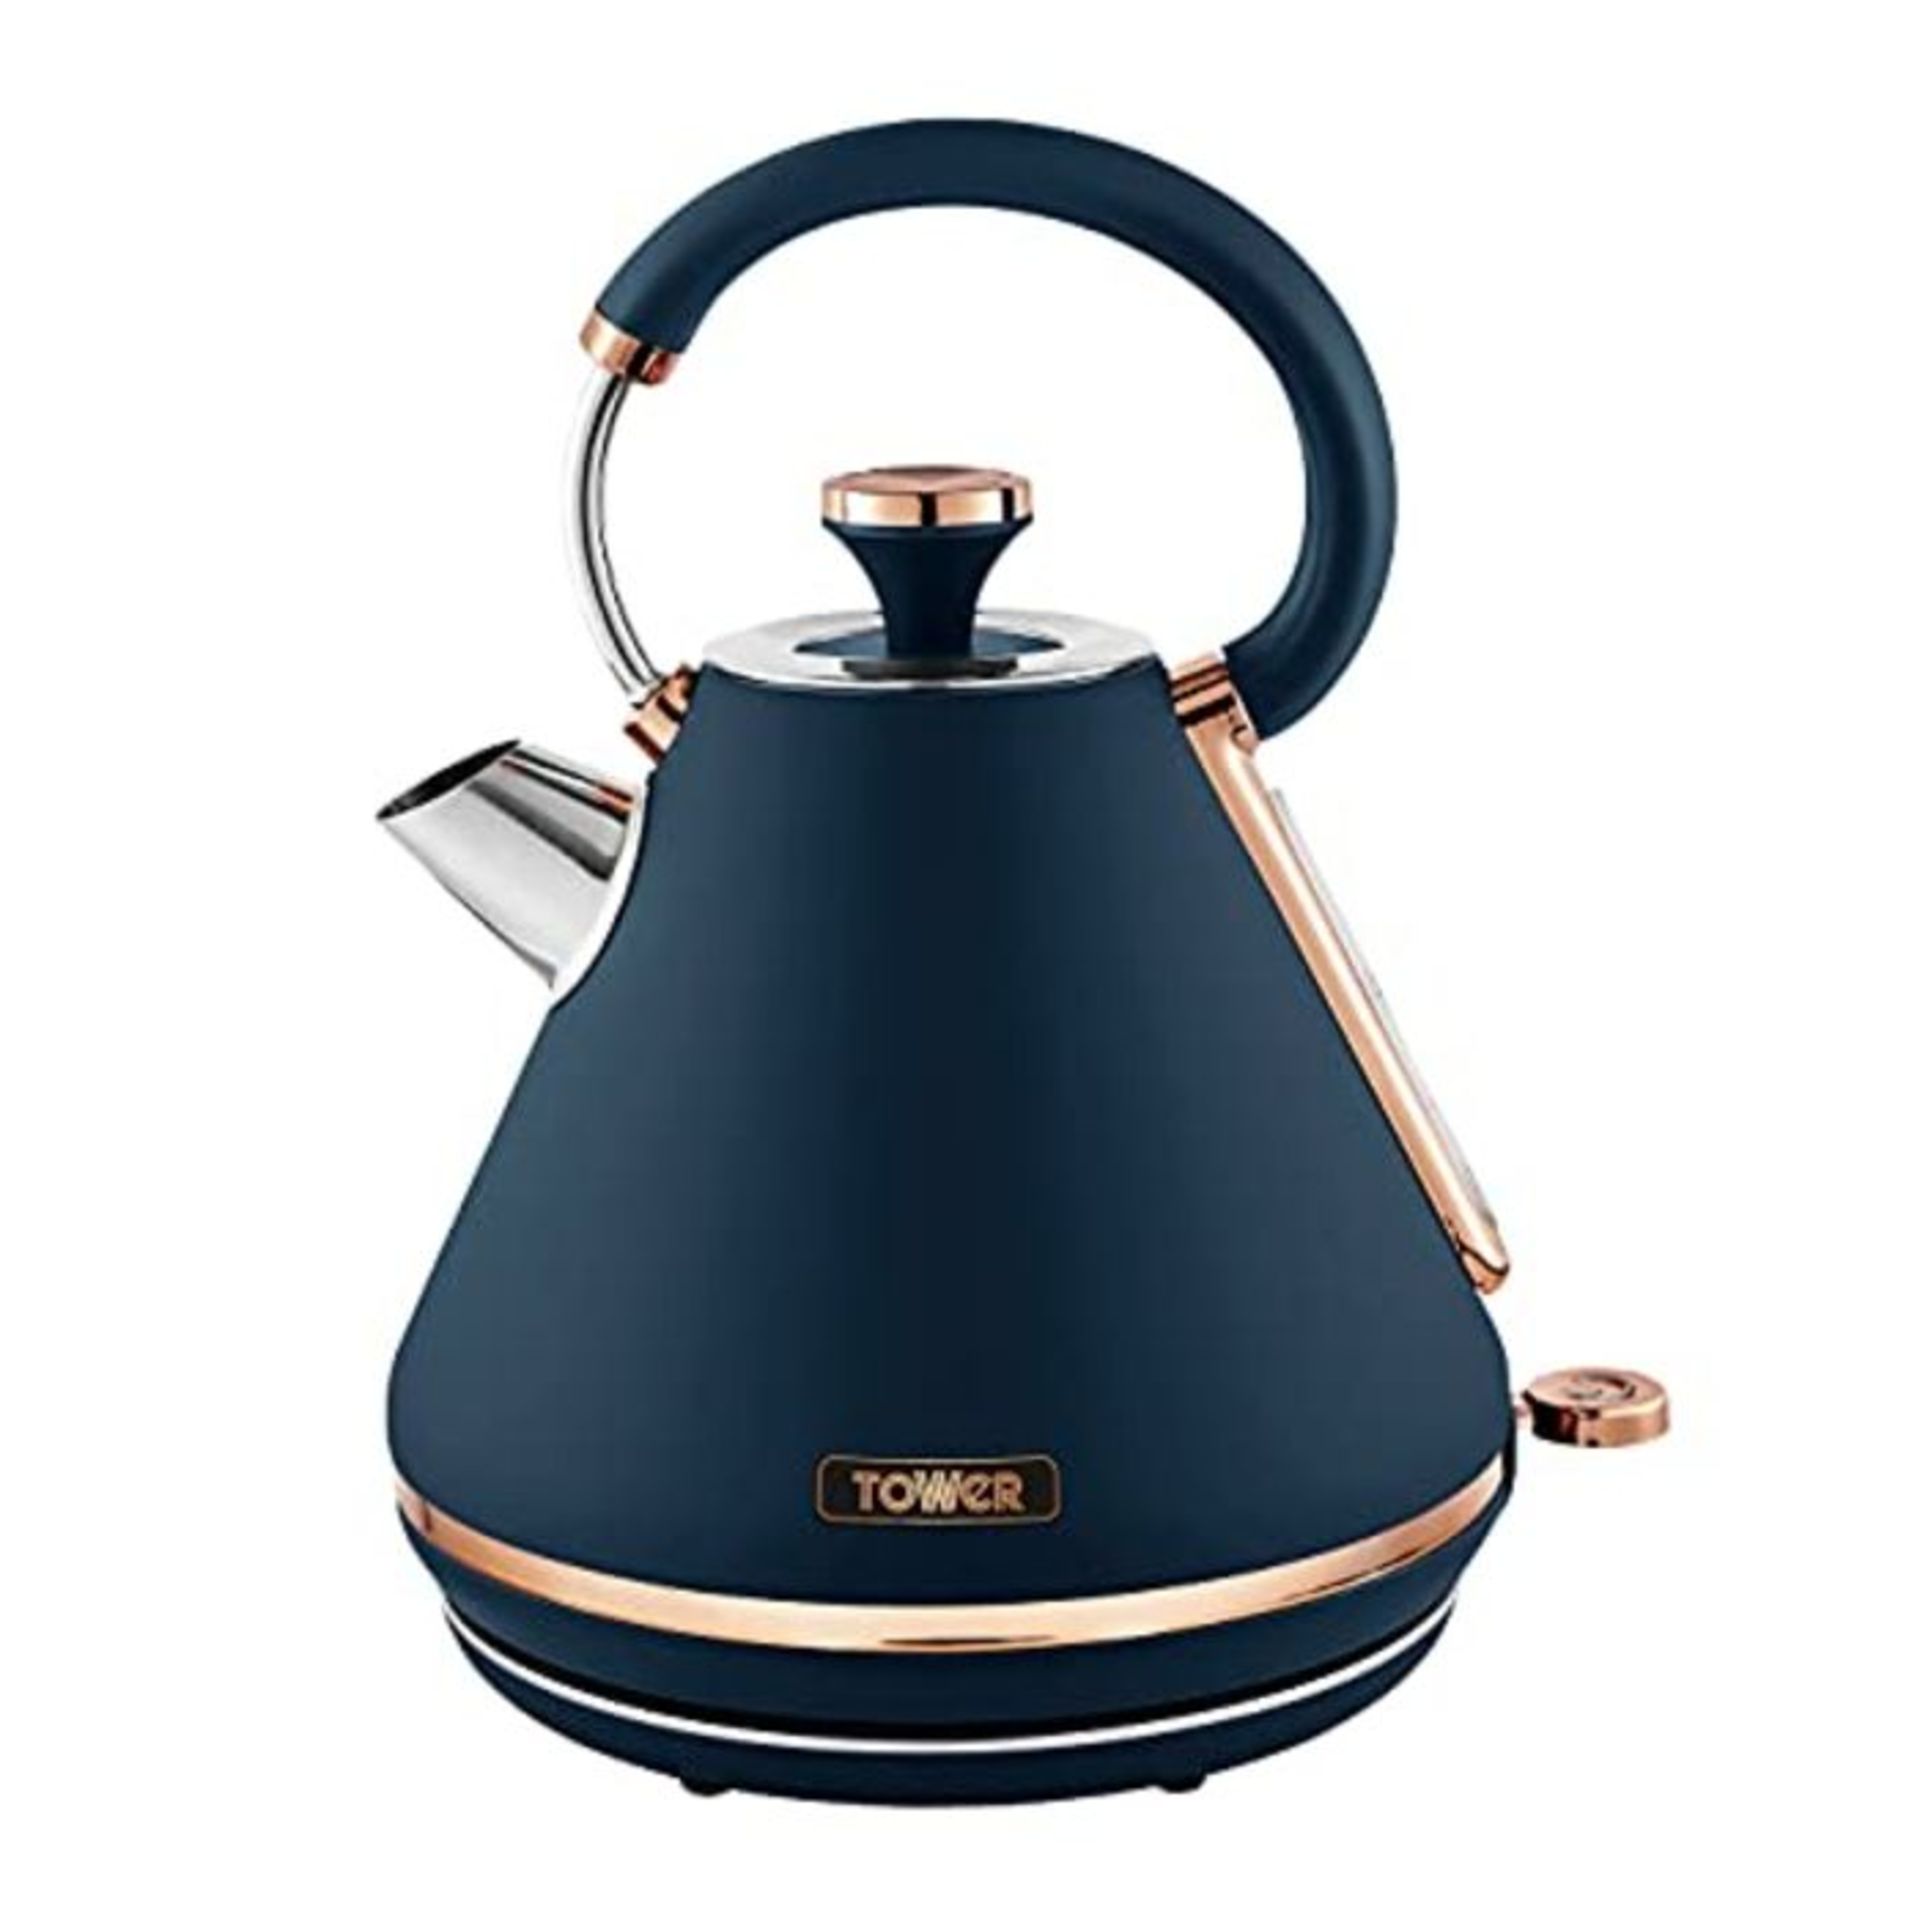 Tower T10044MNB Cavaletto Pyramid Kettle with Fast Boil, Detachable Filter, 1.7 Litre,